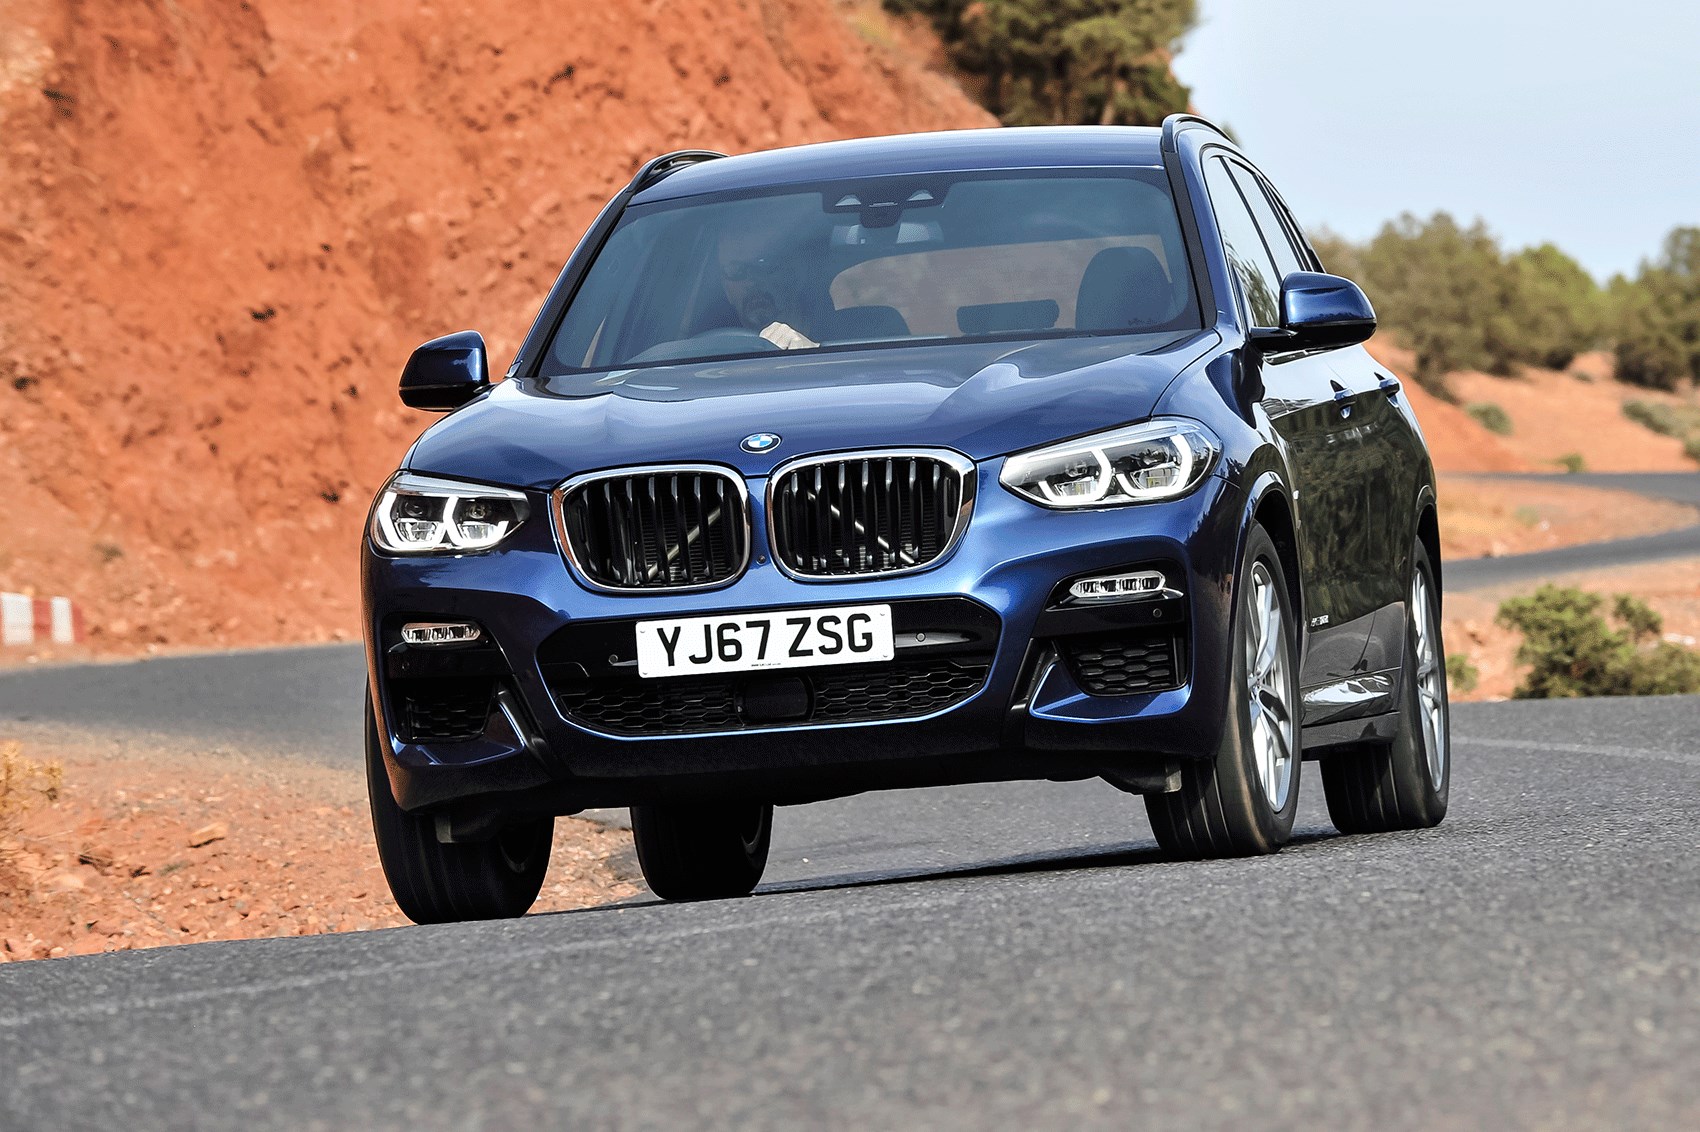 BMW X3 Review: It's All You Want In A Mid-Sized SUV